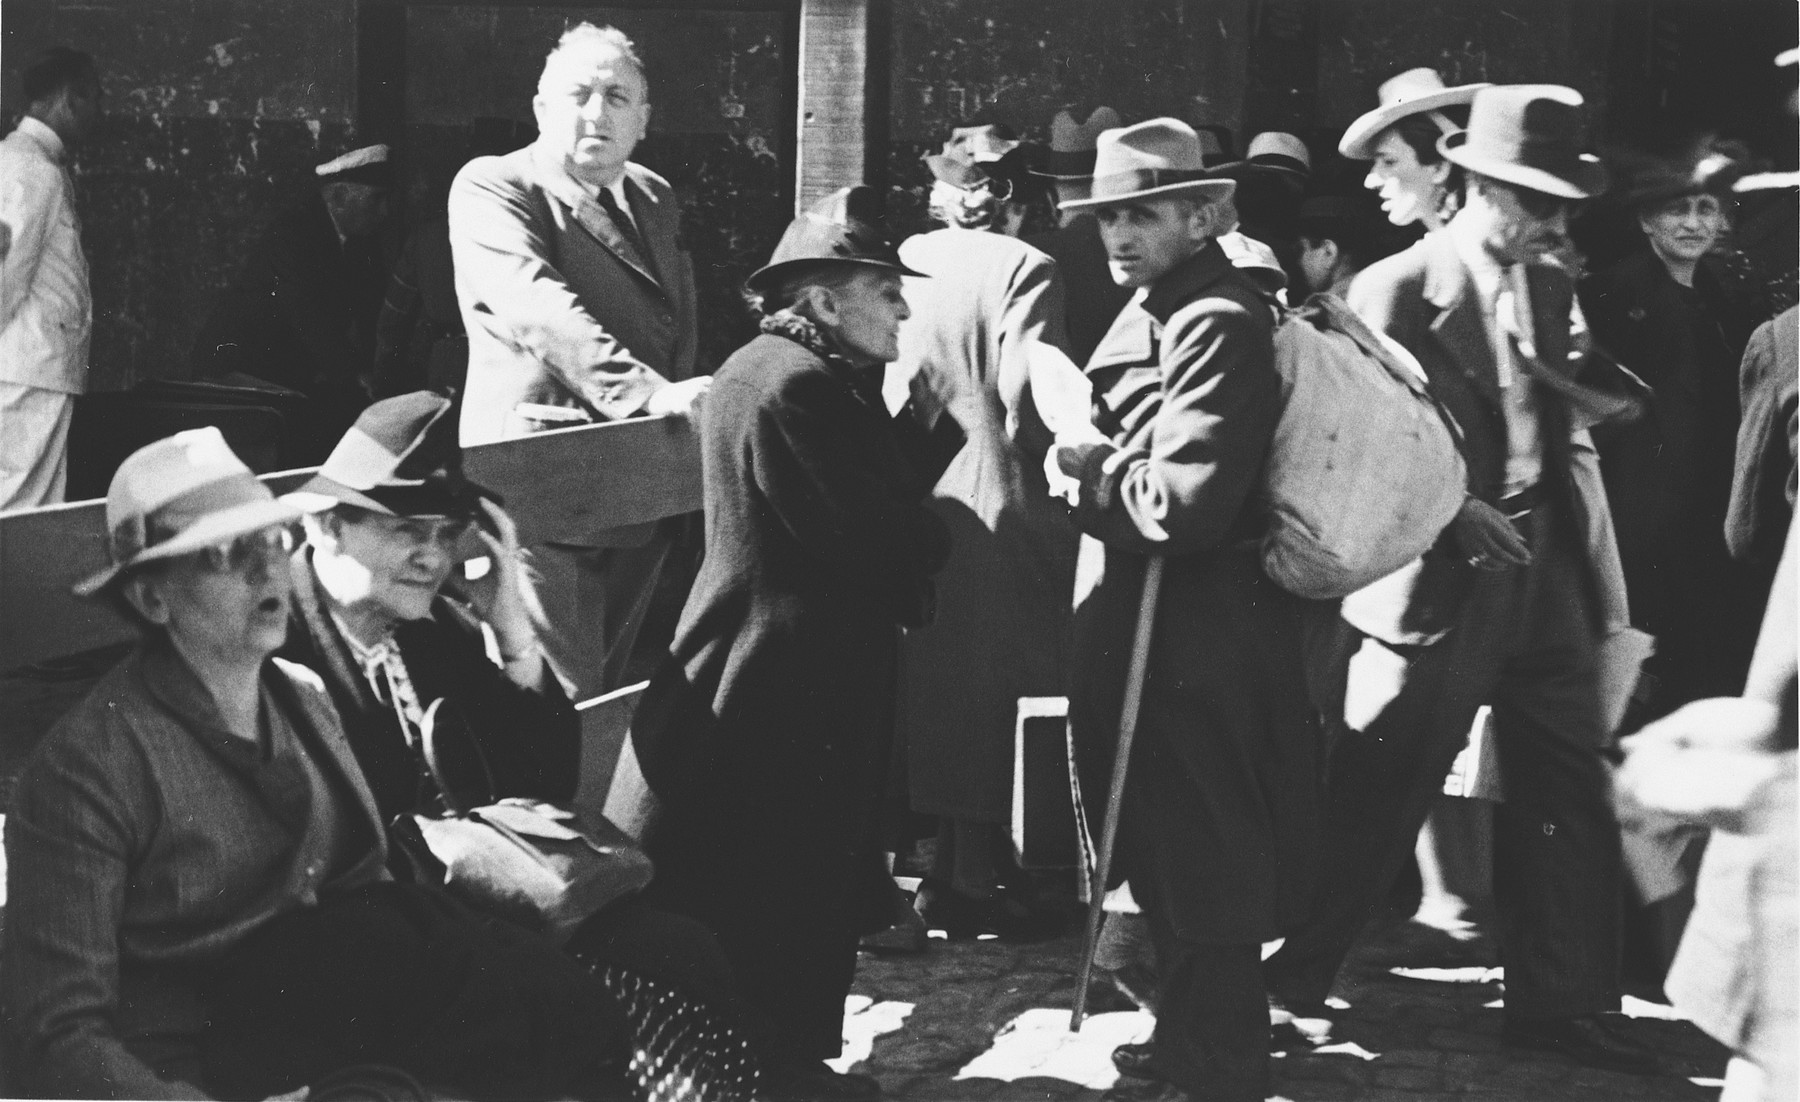 Albert Nussbaum, Director of Transmigration for the American Joint Distribution Committee, observes the scene at the port of Lisbon where Jewish refugees wait to board the SS Mouzinho.